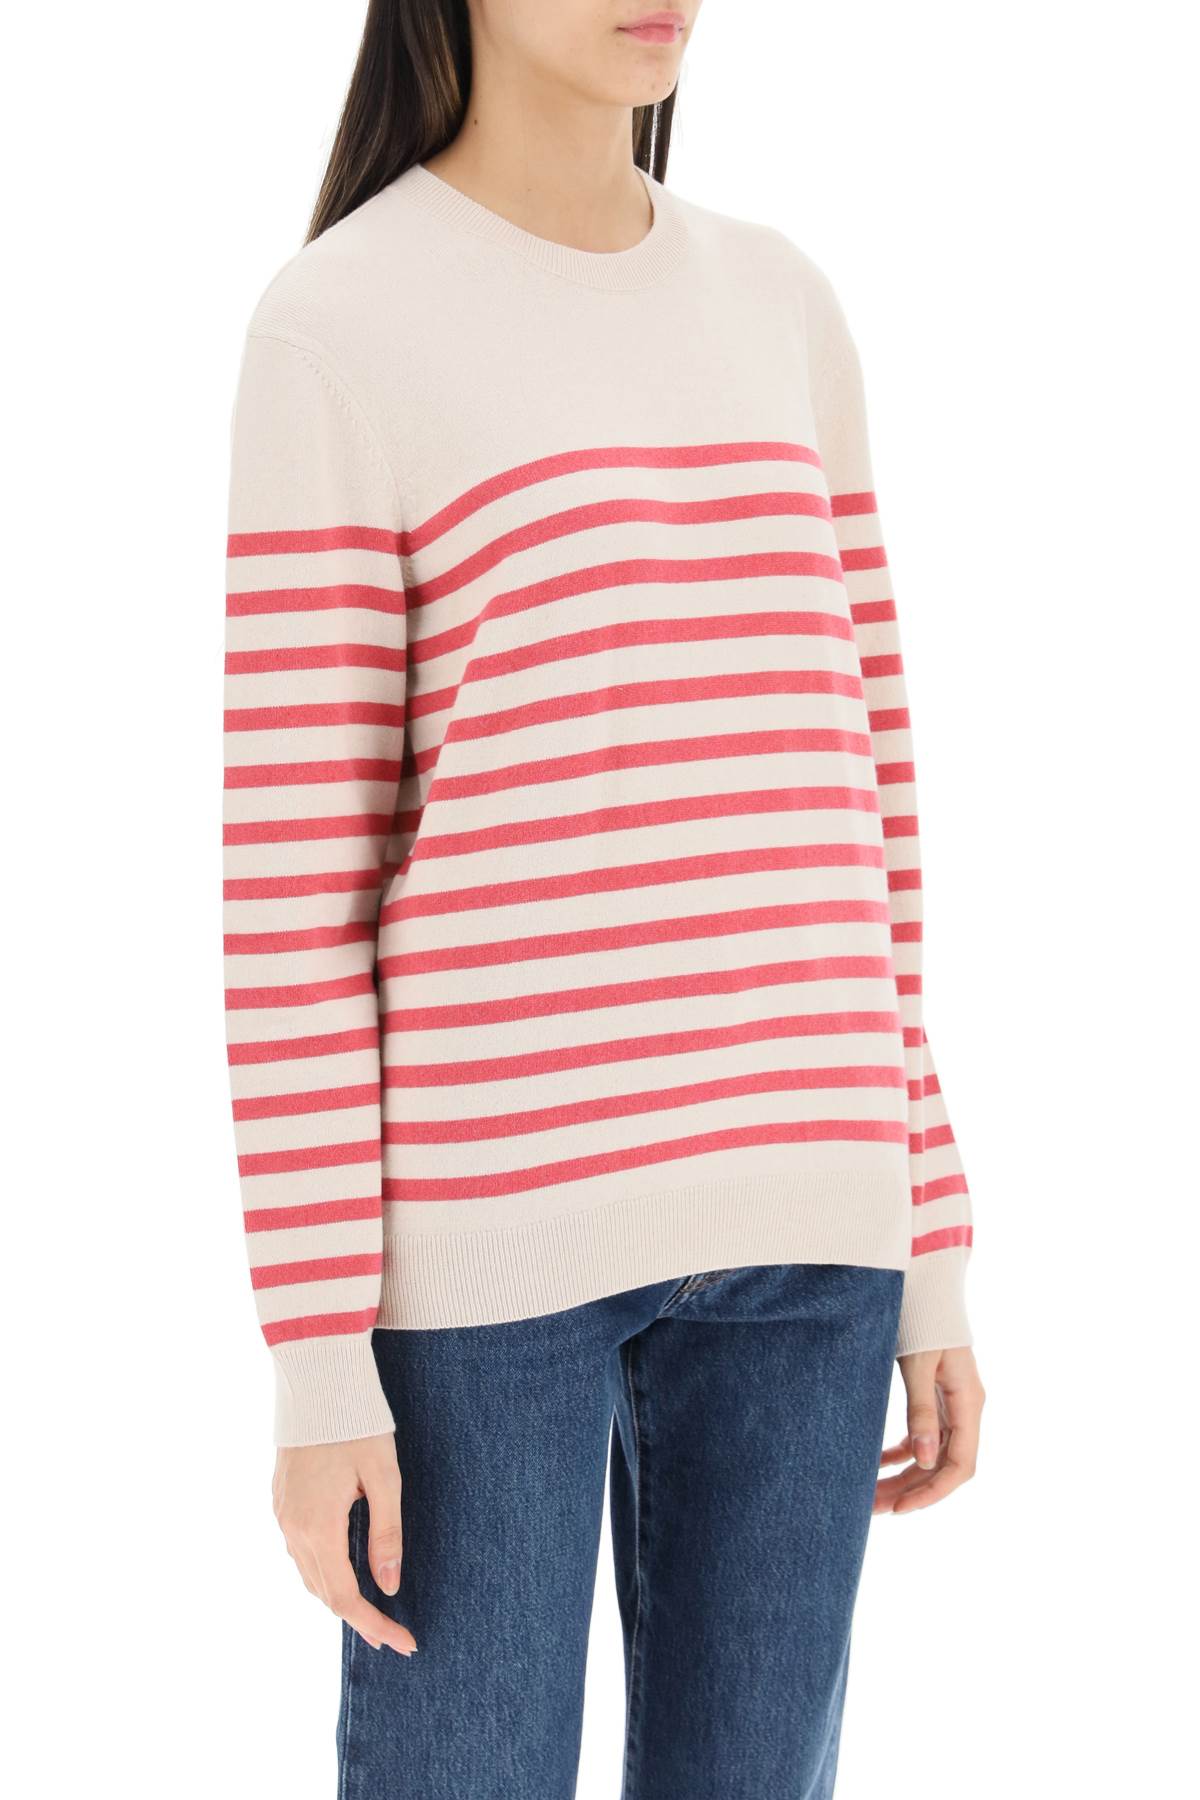 A.P.C. 'Phoebe' Striped Cashmere And Cotton Sweater   Beige